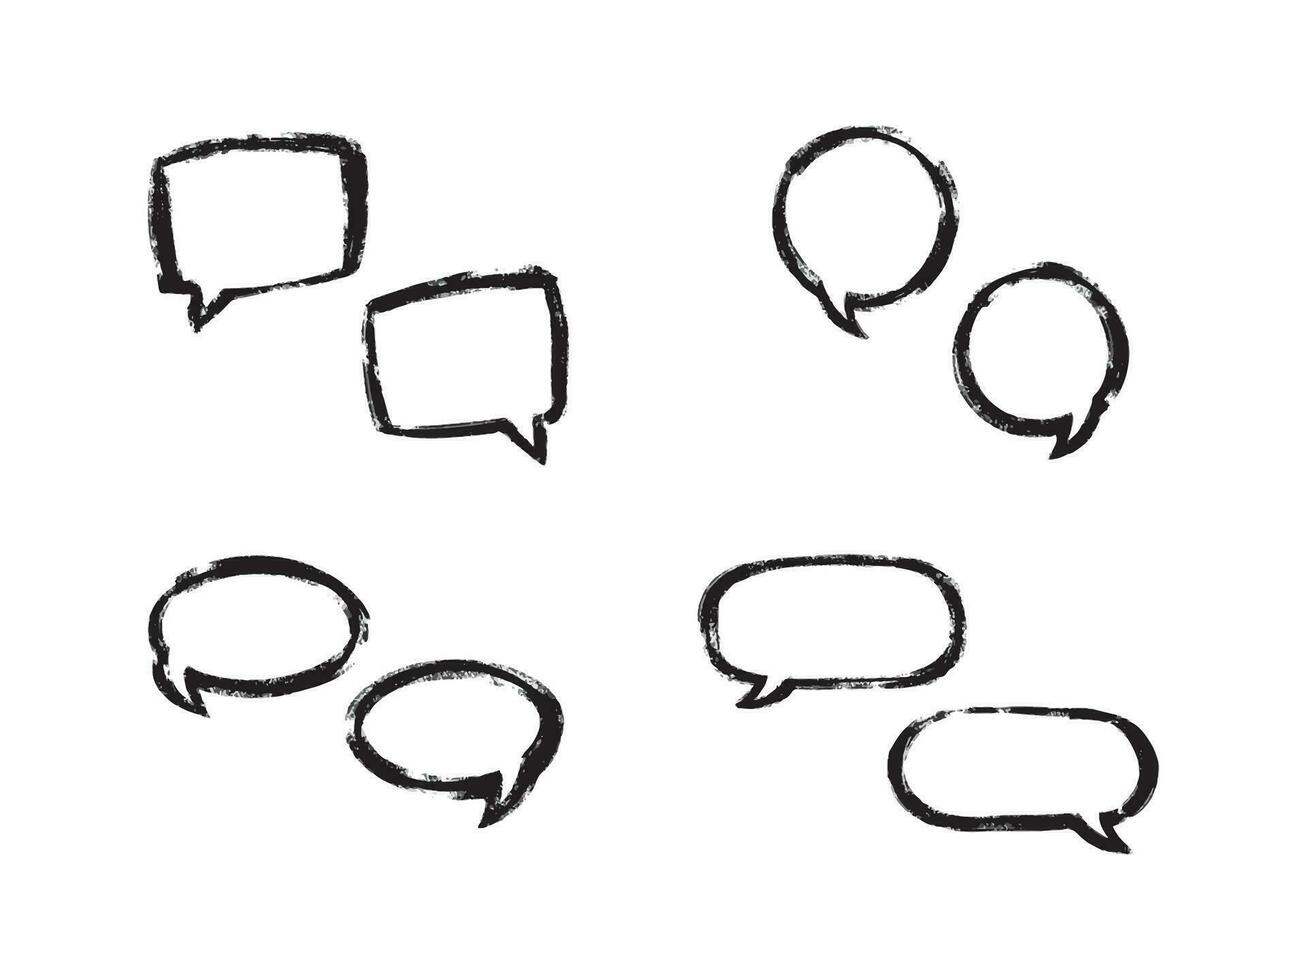 Hand drawn black speech bubble on white. Mind clouds templates set. Abstract sketches. Set of think and talk speech bubbles. Black and white illustration vector